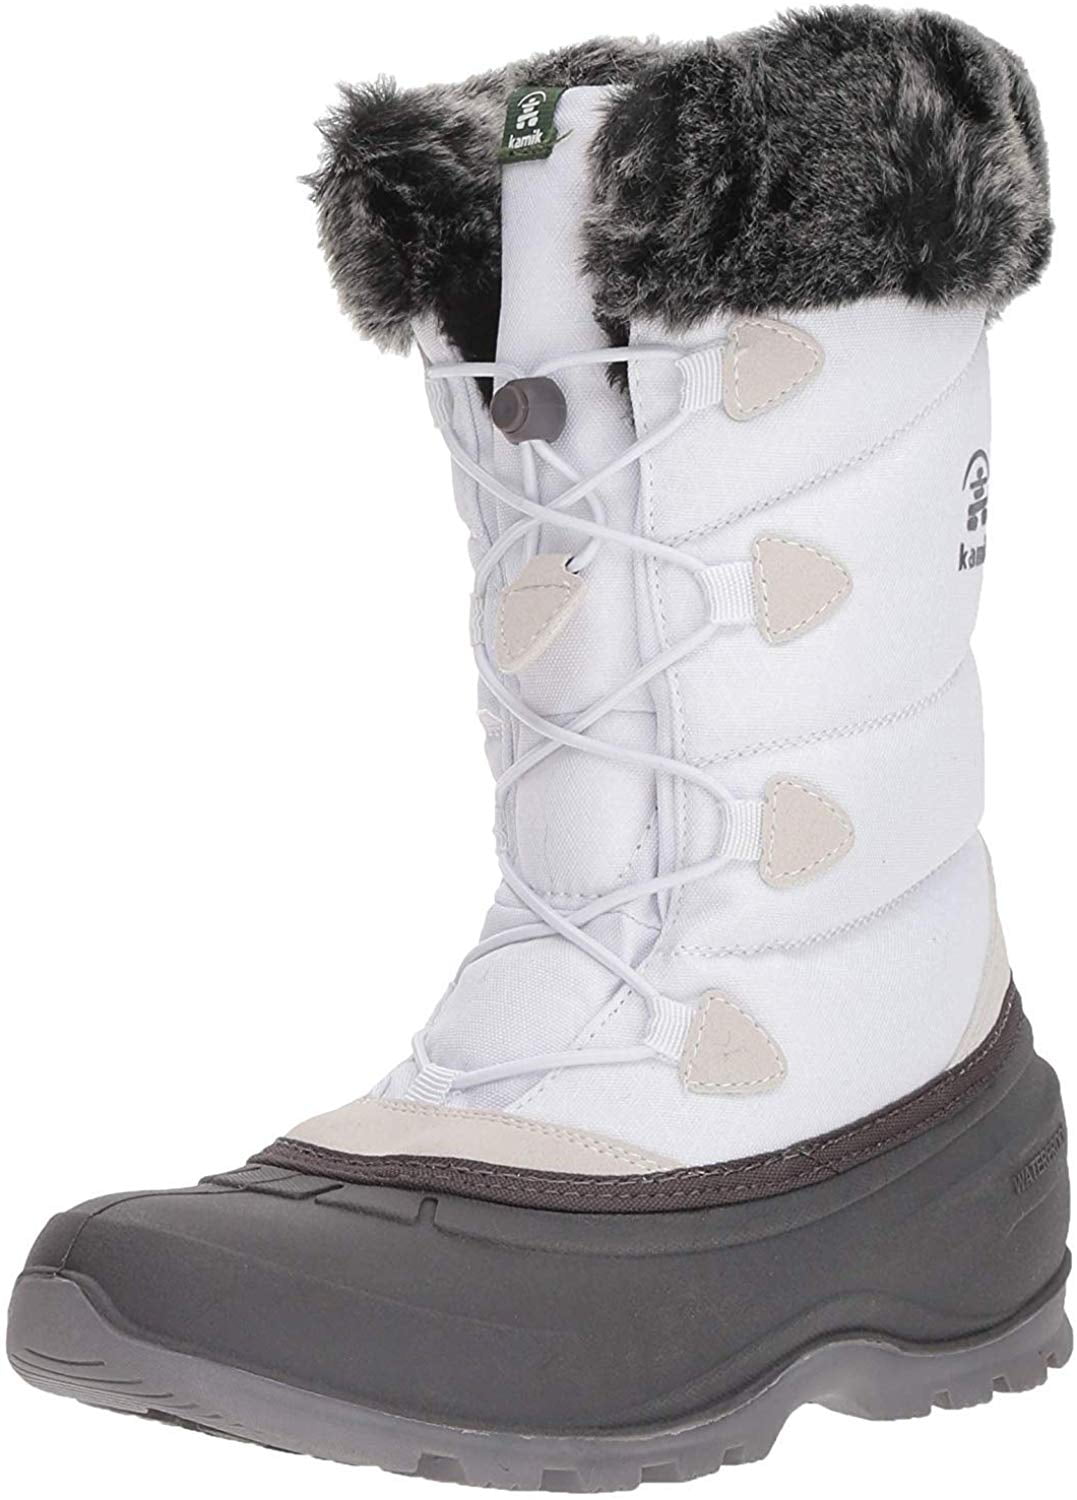 white cold weather boots